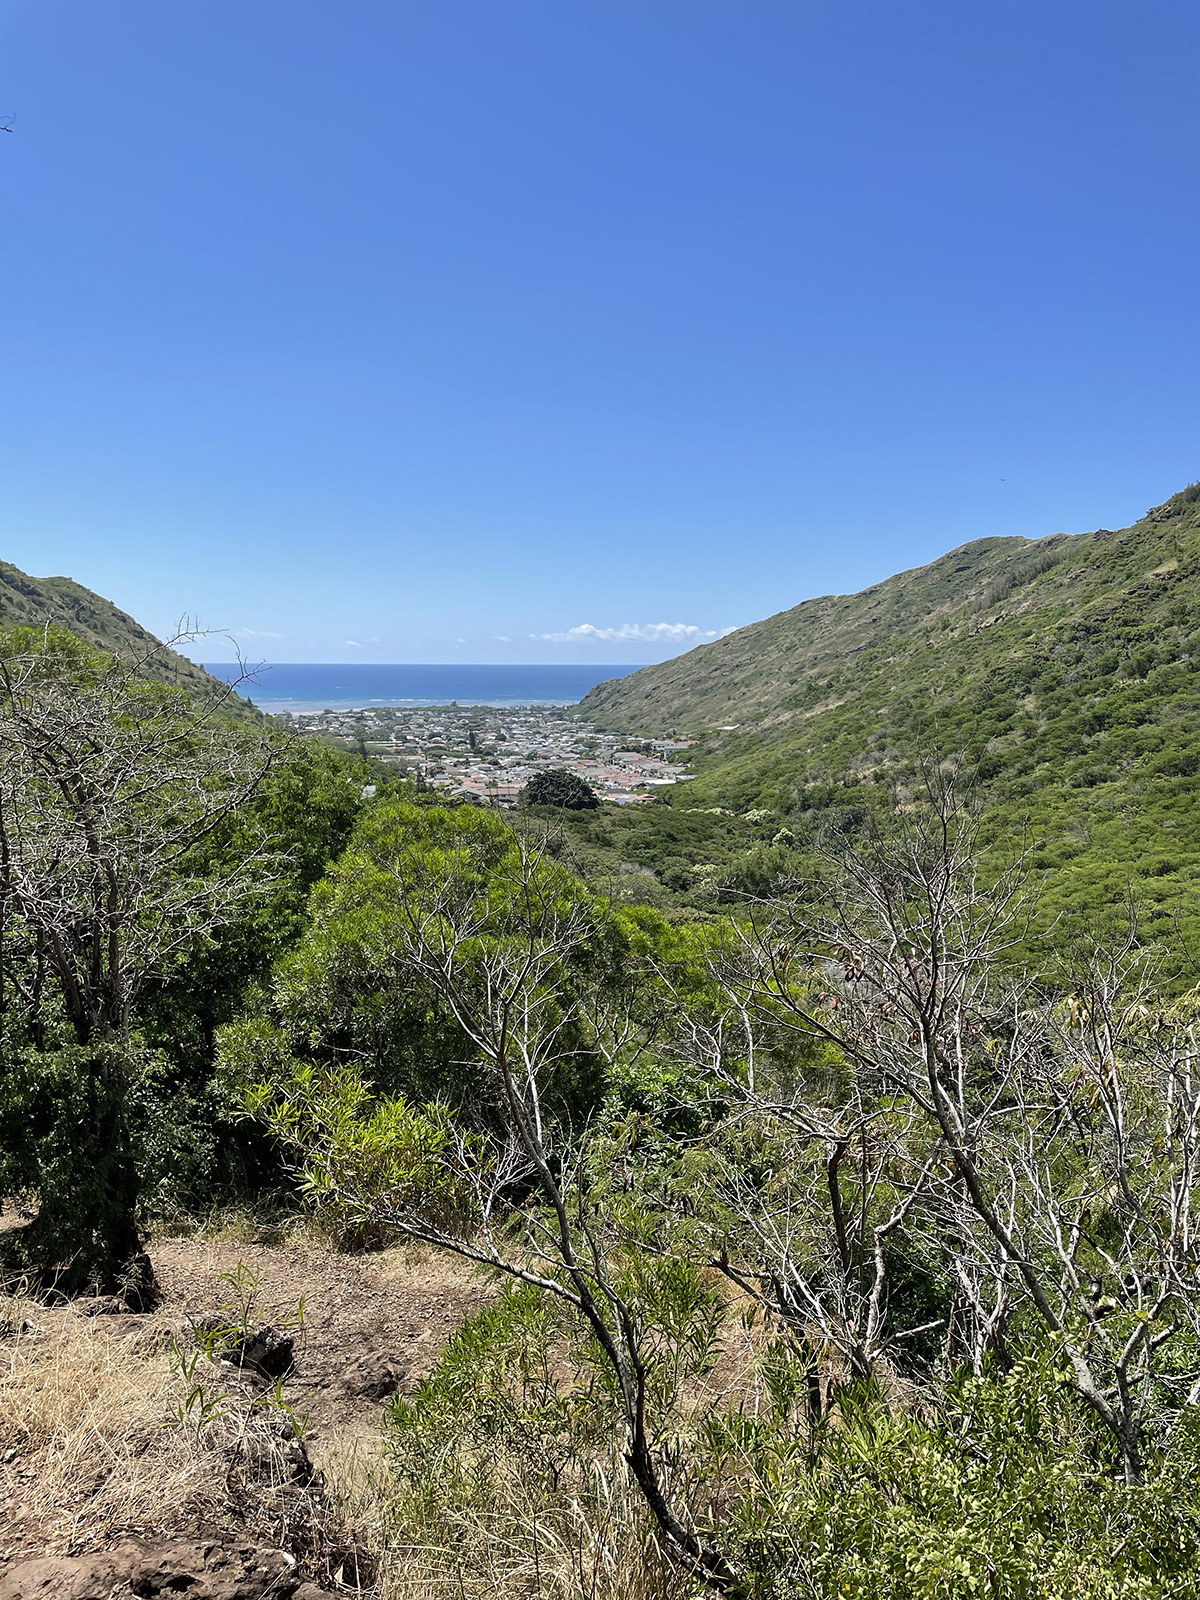 A view of the ocean from high up on the hiking trail